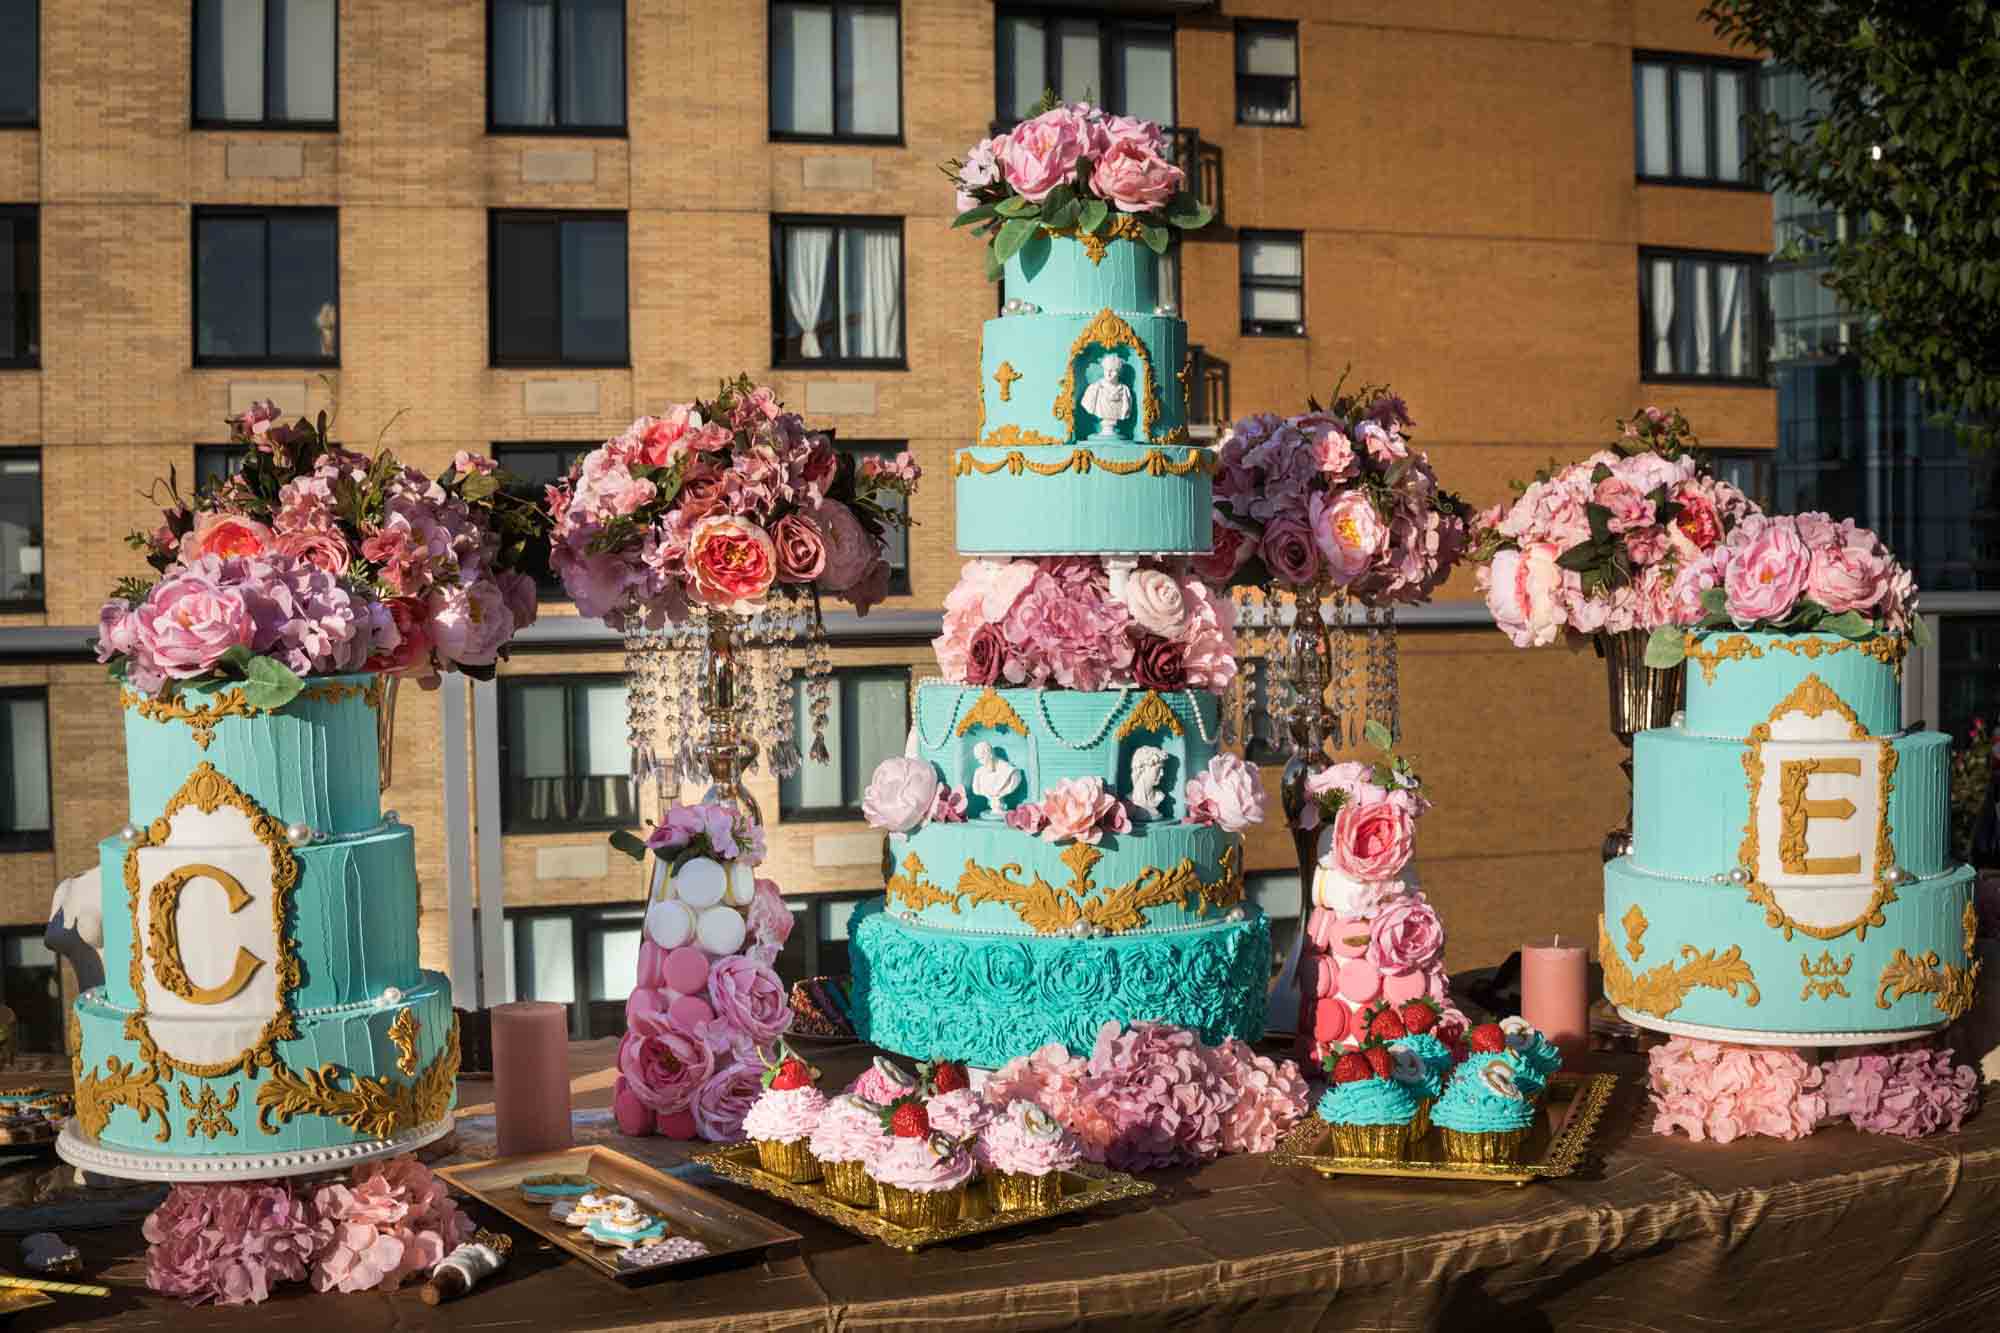 Table filled with elaborate cakes and cupcakes for an article on event planning photography tips